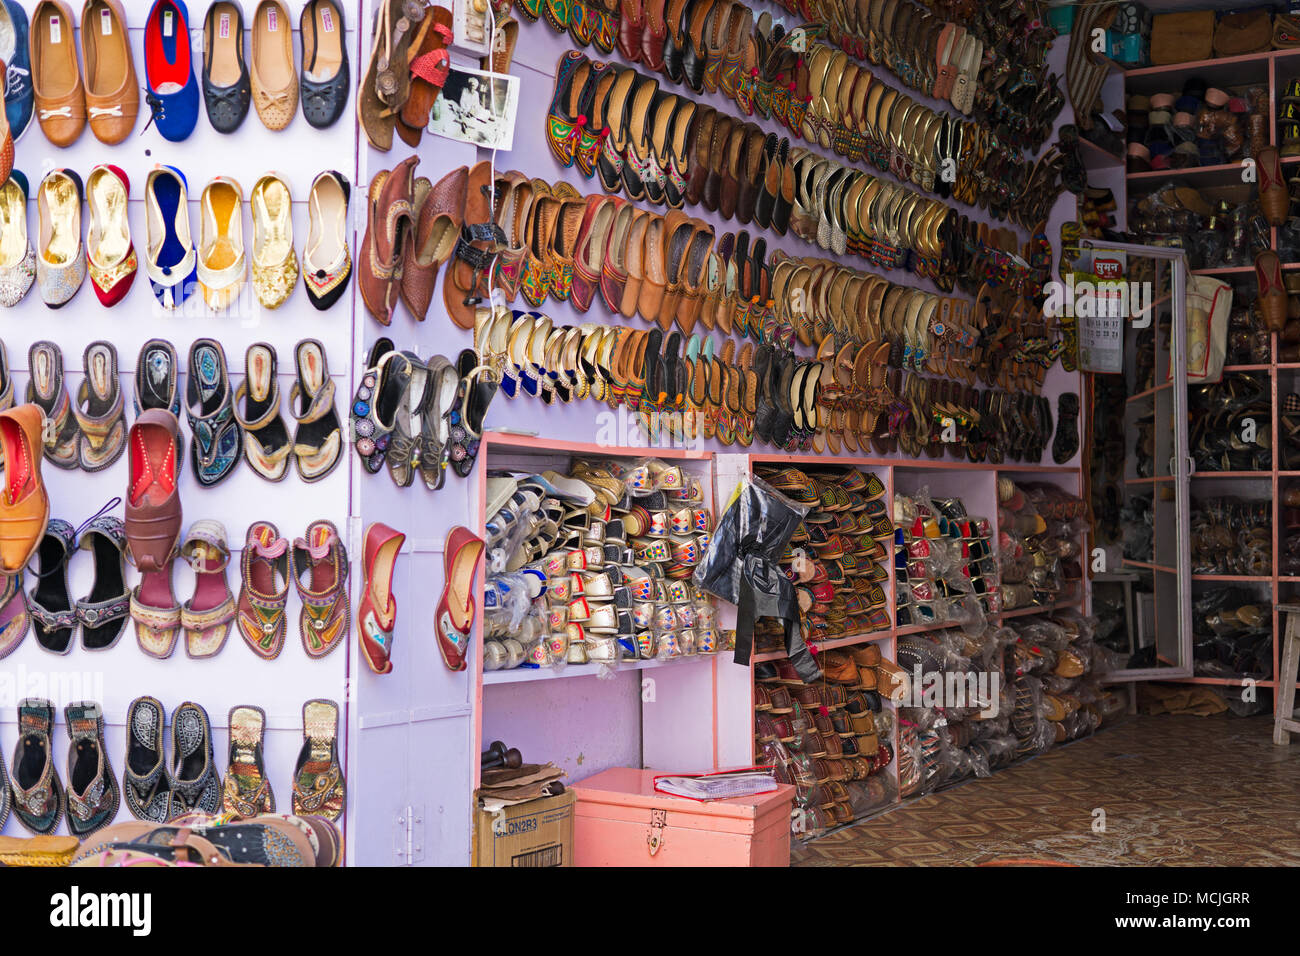 Mandawa, India - February 24, 2018: Shoe's shop with colorful shoes display in Mandawa town, Rajasthan. Stock Photo